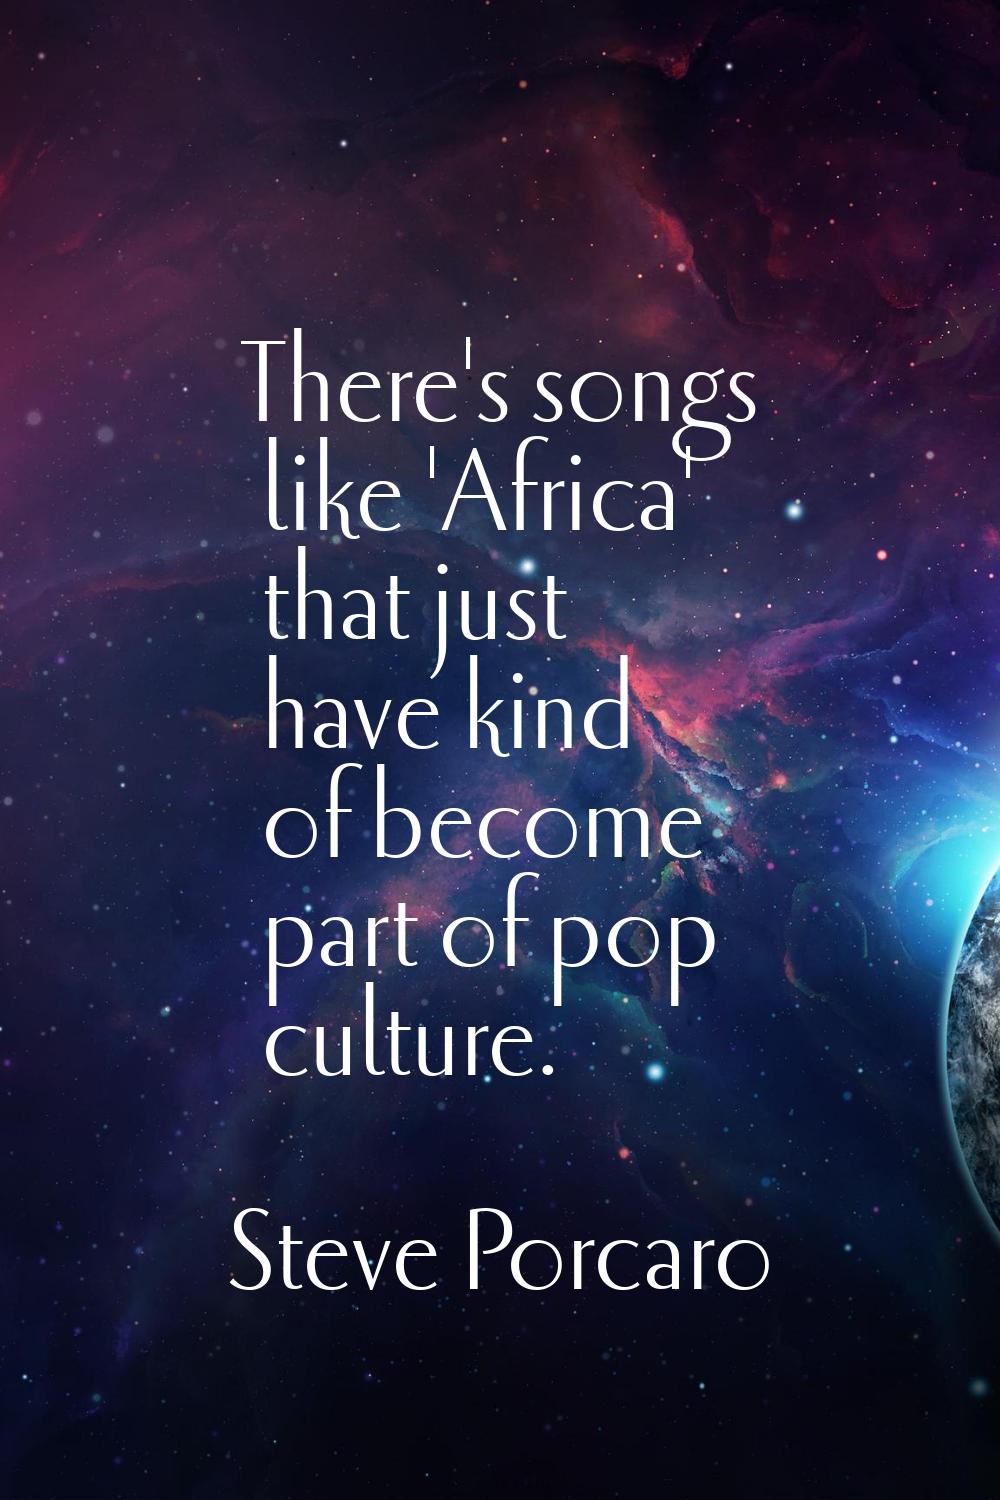 There's songs like 'Africa' that just have kind of become part of pop culture.